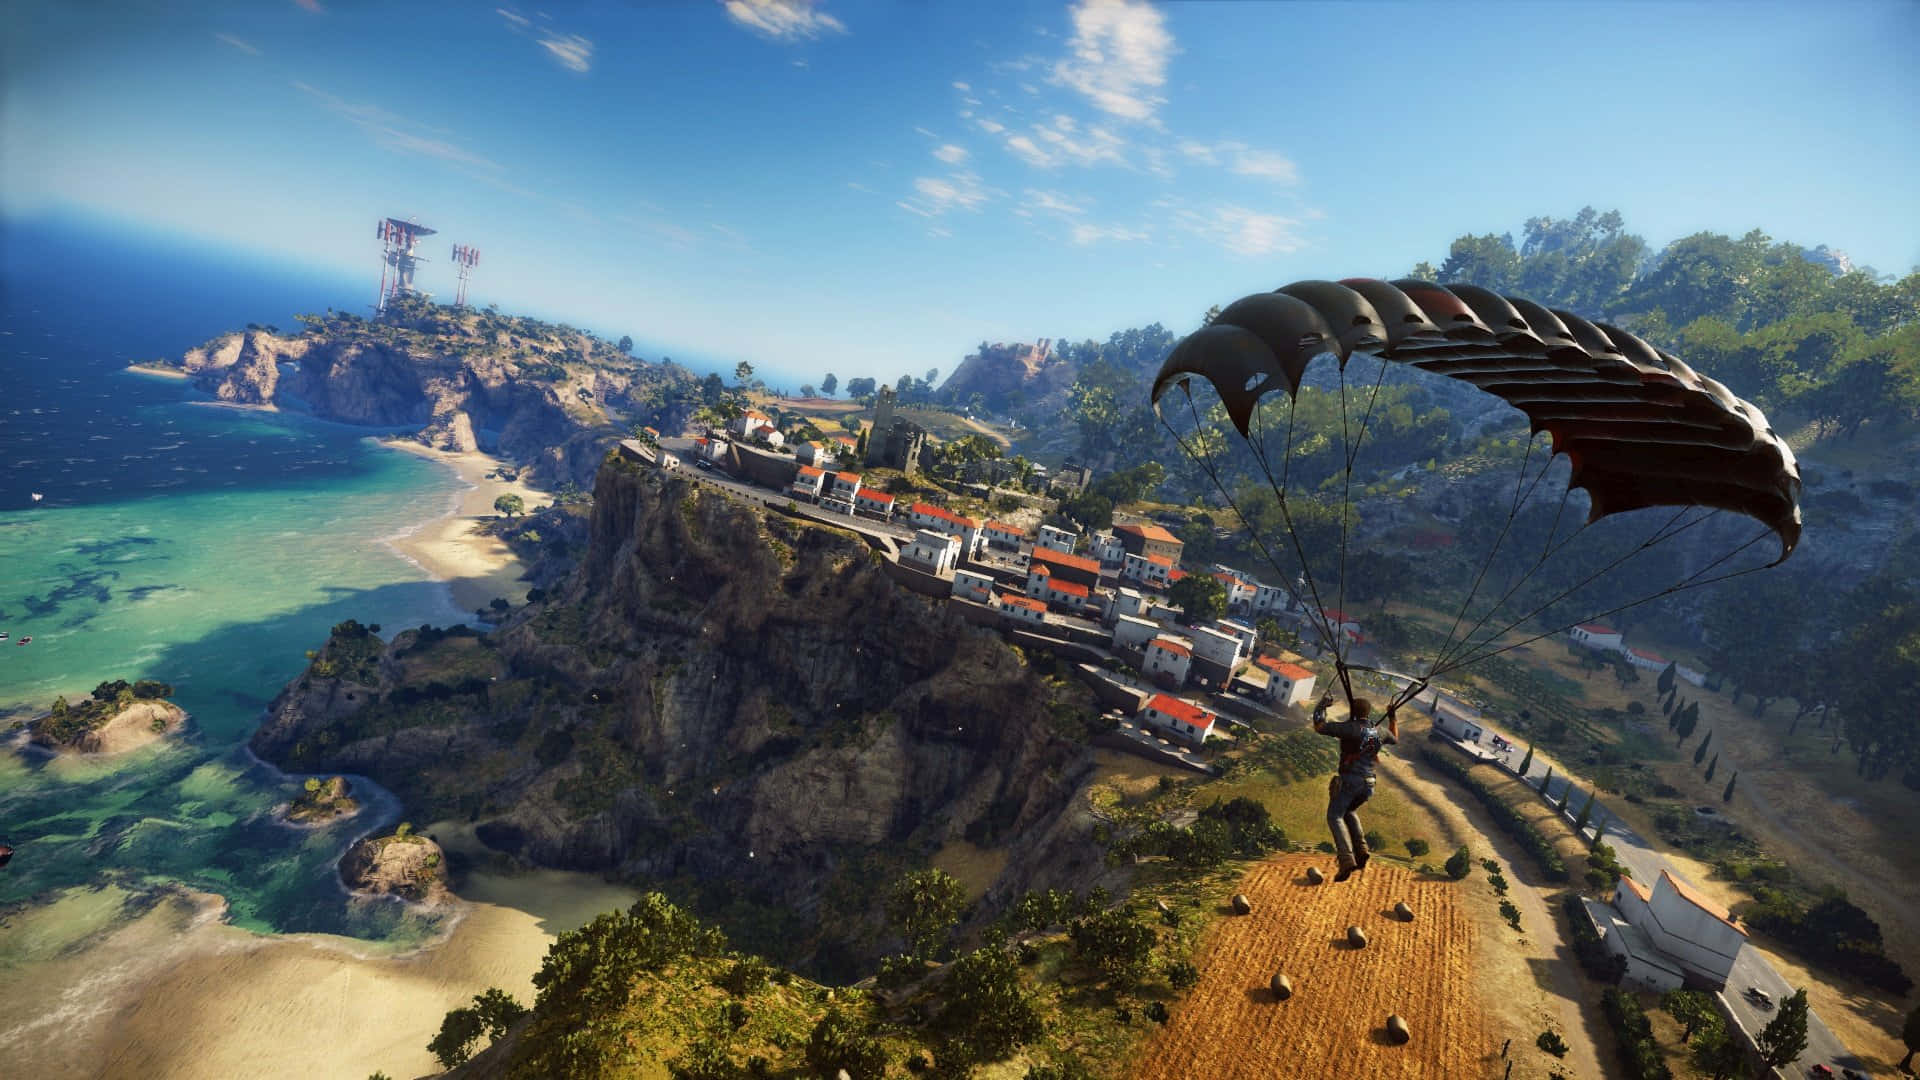 1920x1080 Just Cause 4 Background Parachute